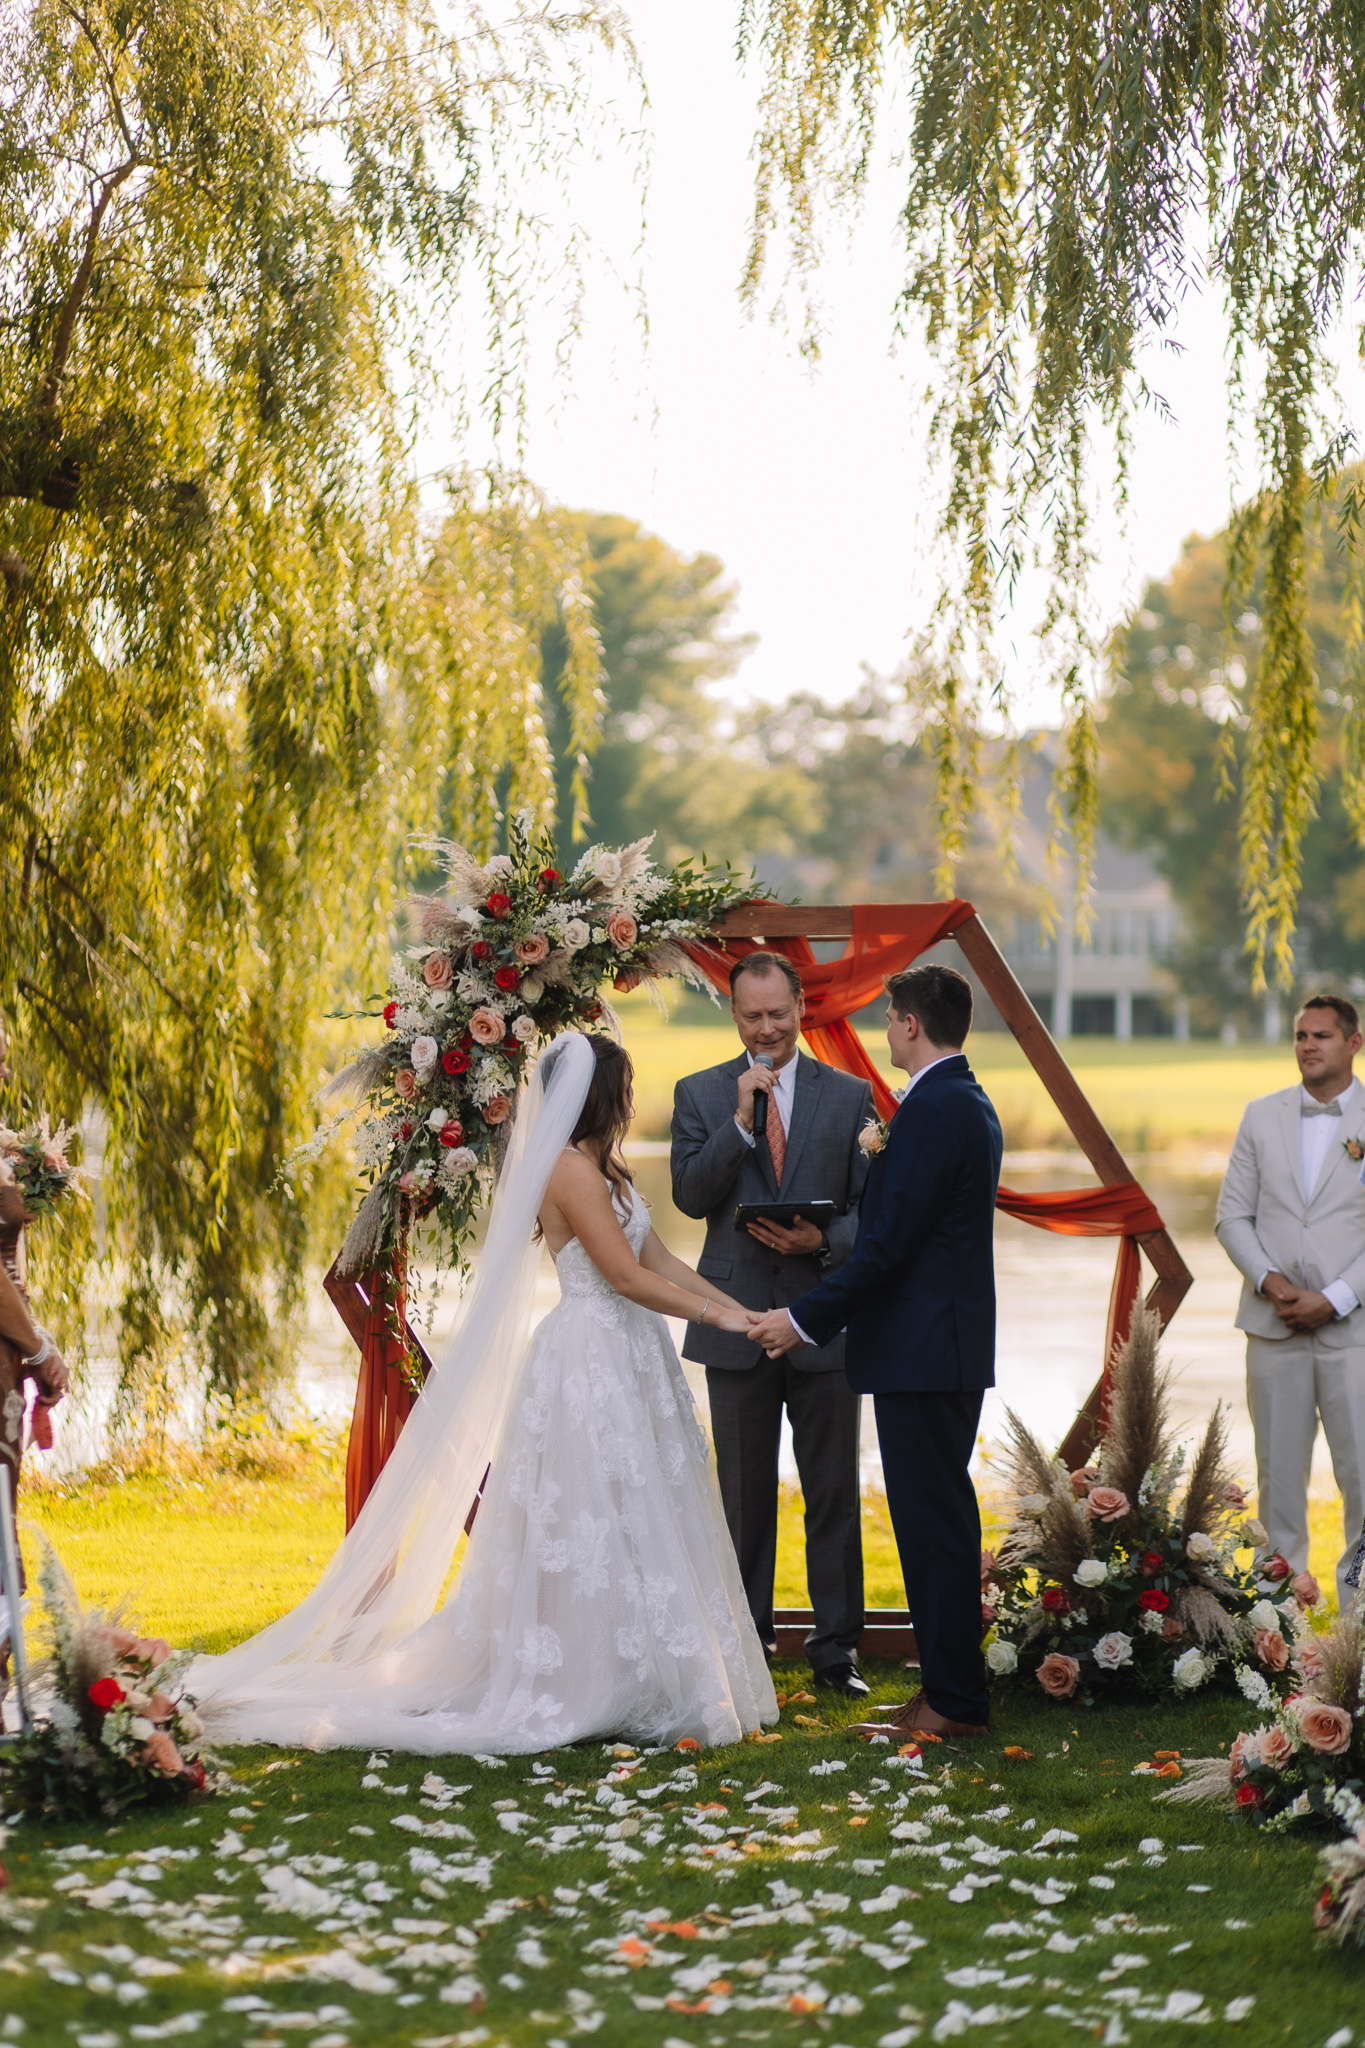 A bride and groom holding hands in front of a hexagon wooden arch. Two willow trees hang beside them and the aisle is covered in rose petals